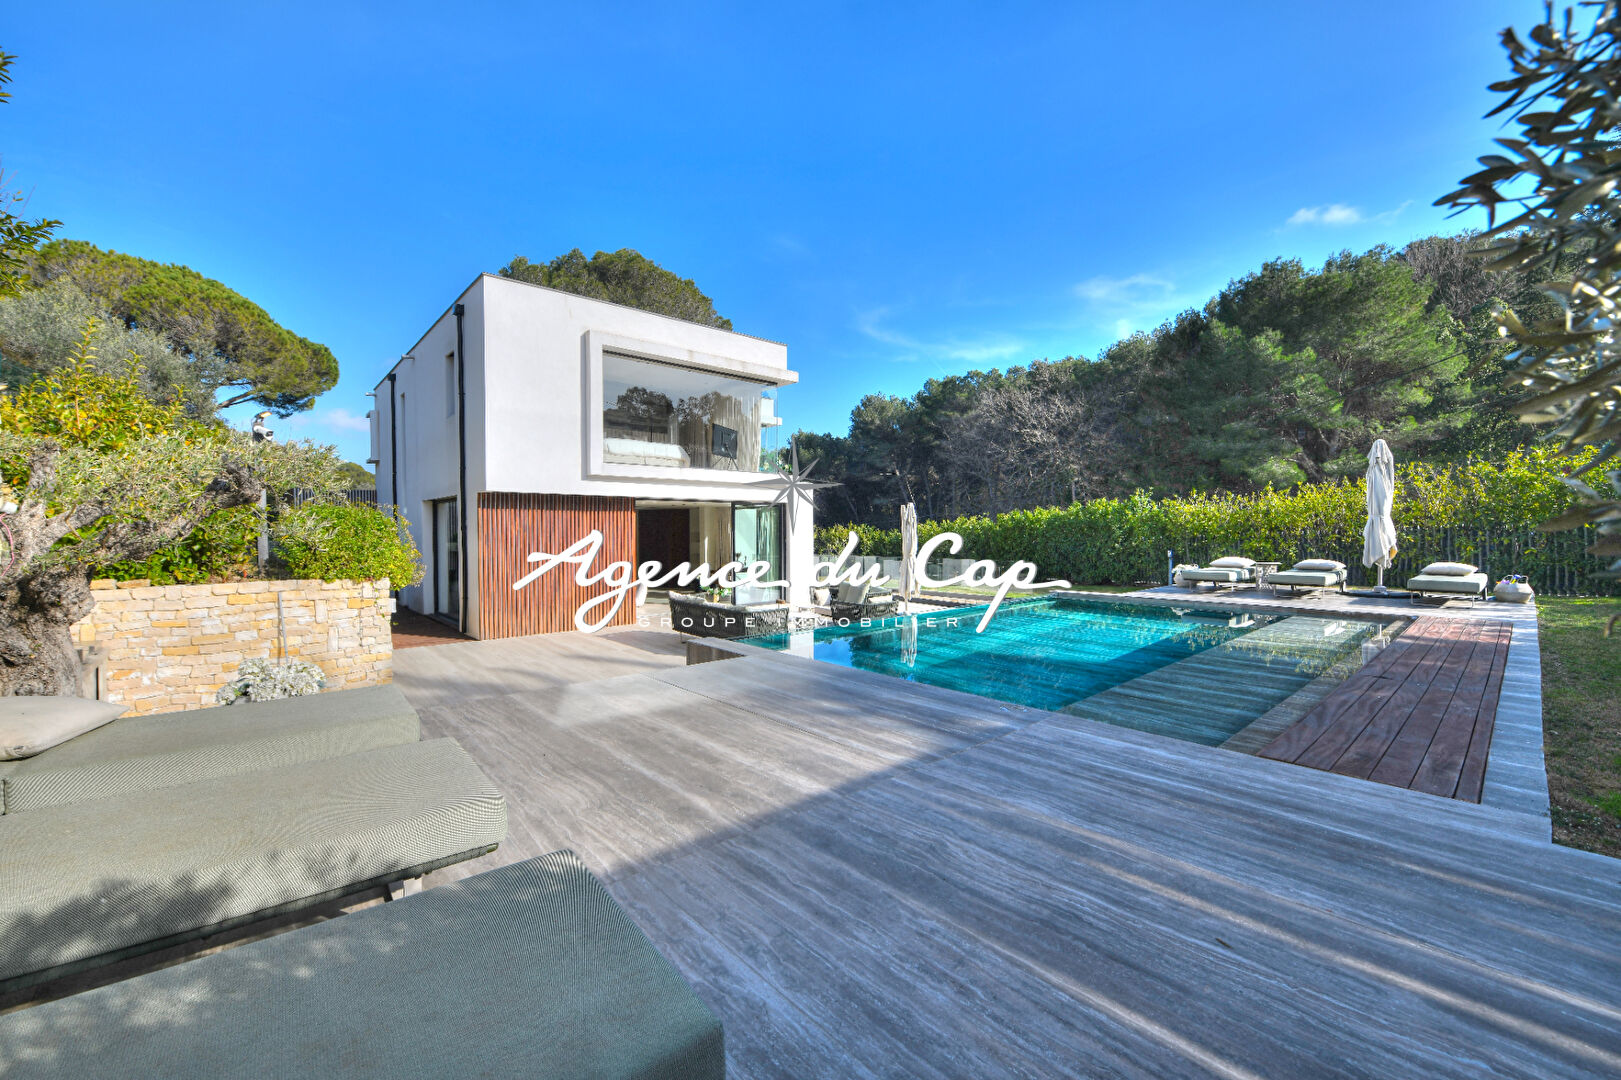 HEIGHTS OF CANNES NEW CONTEMPORARY VILLA SWIMMING POOL HOUSE GARAGE